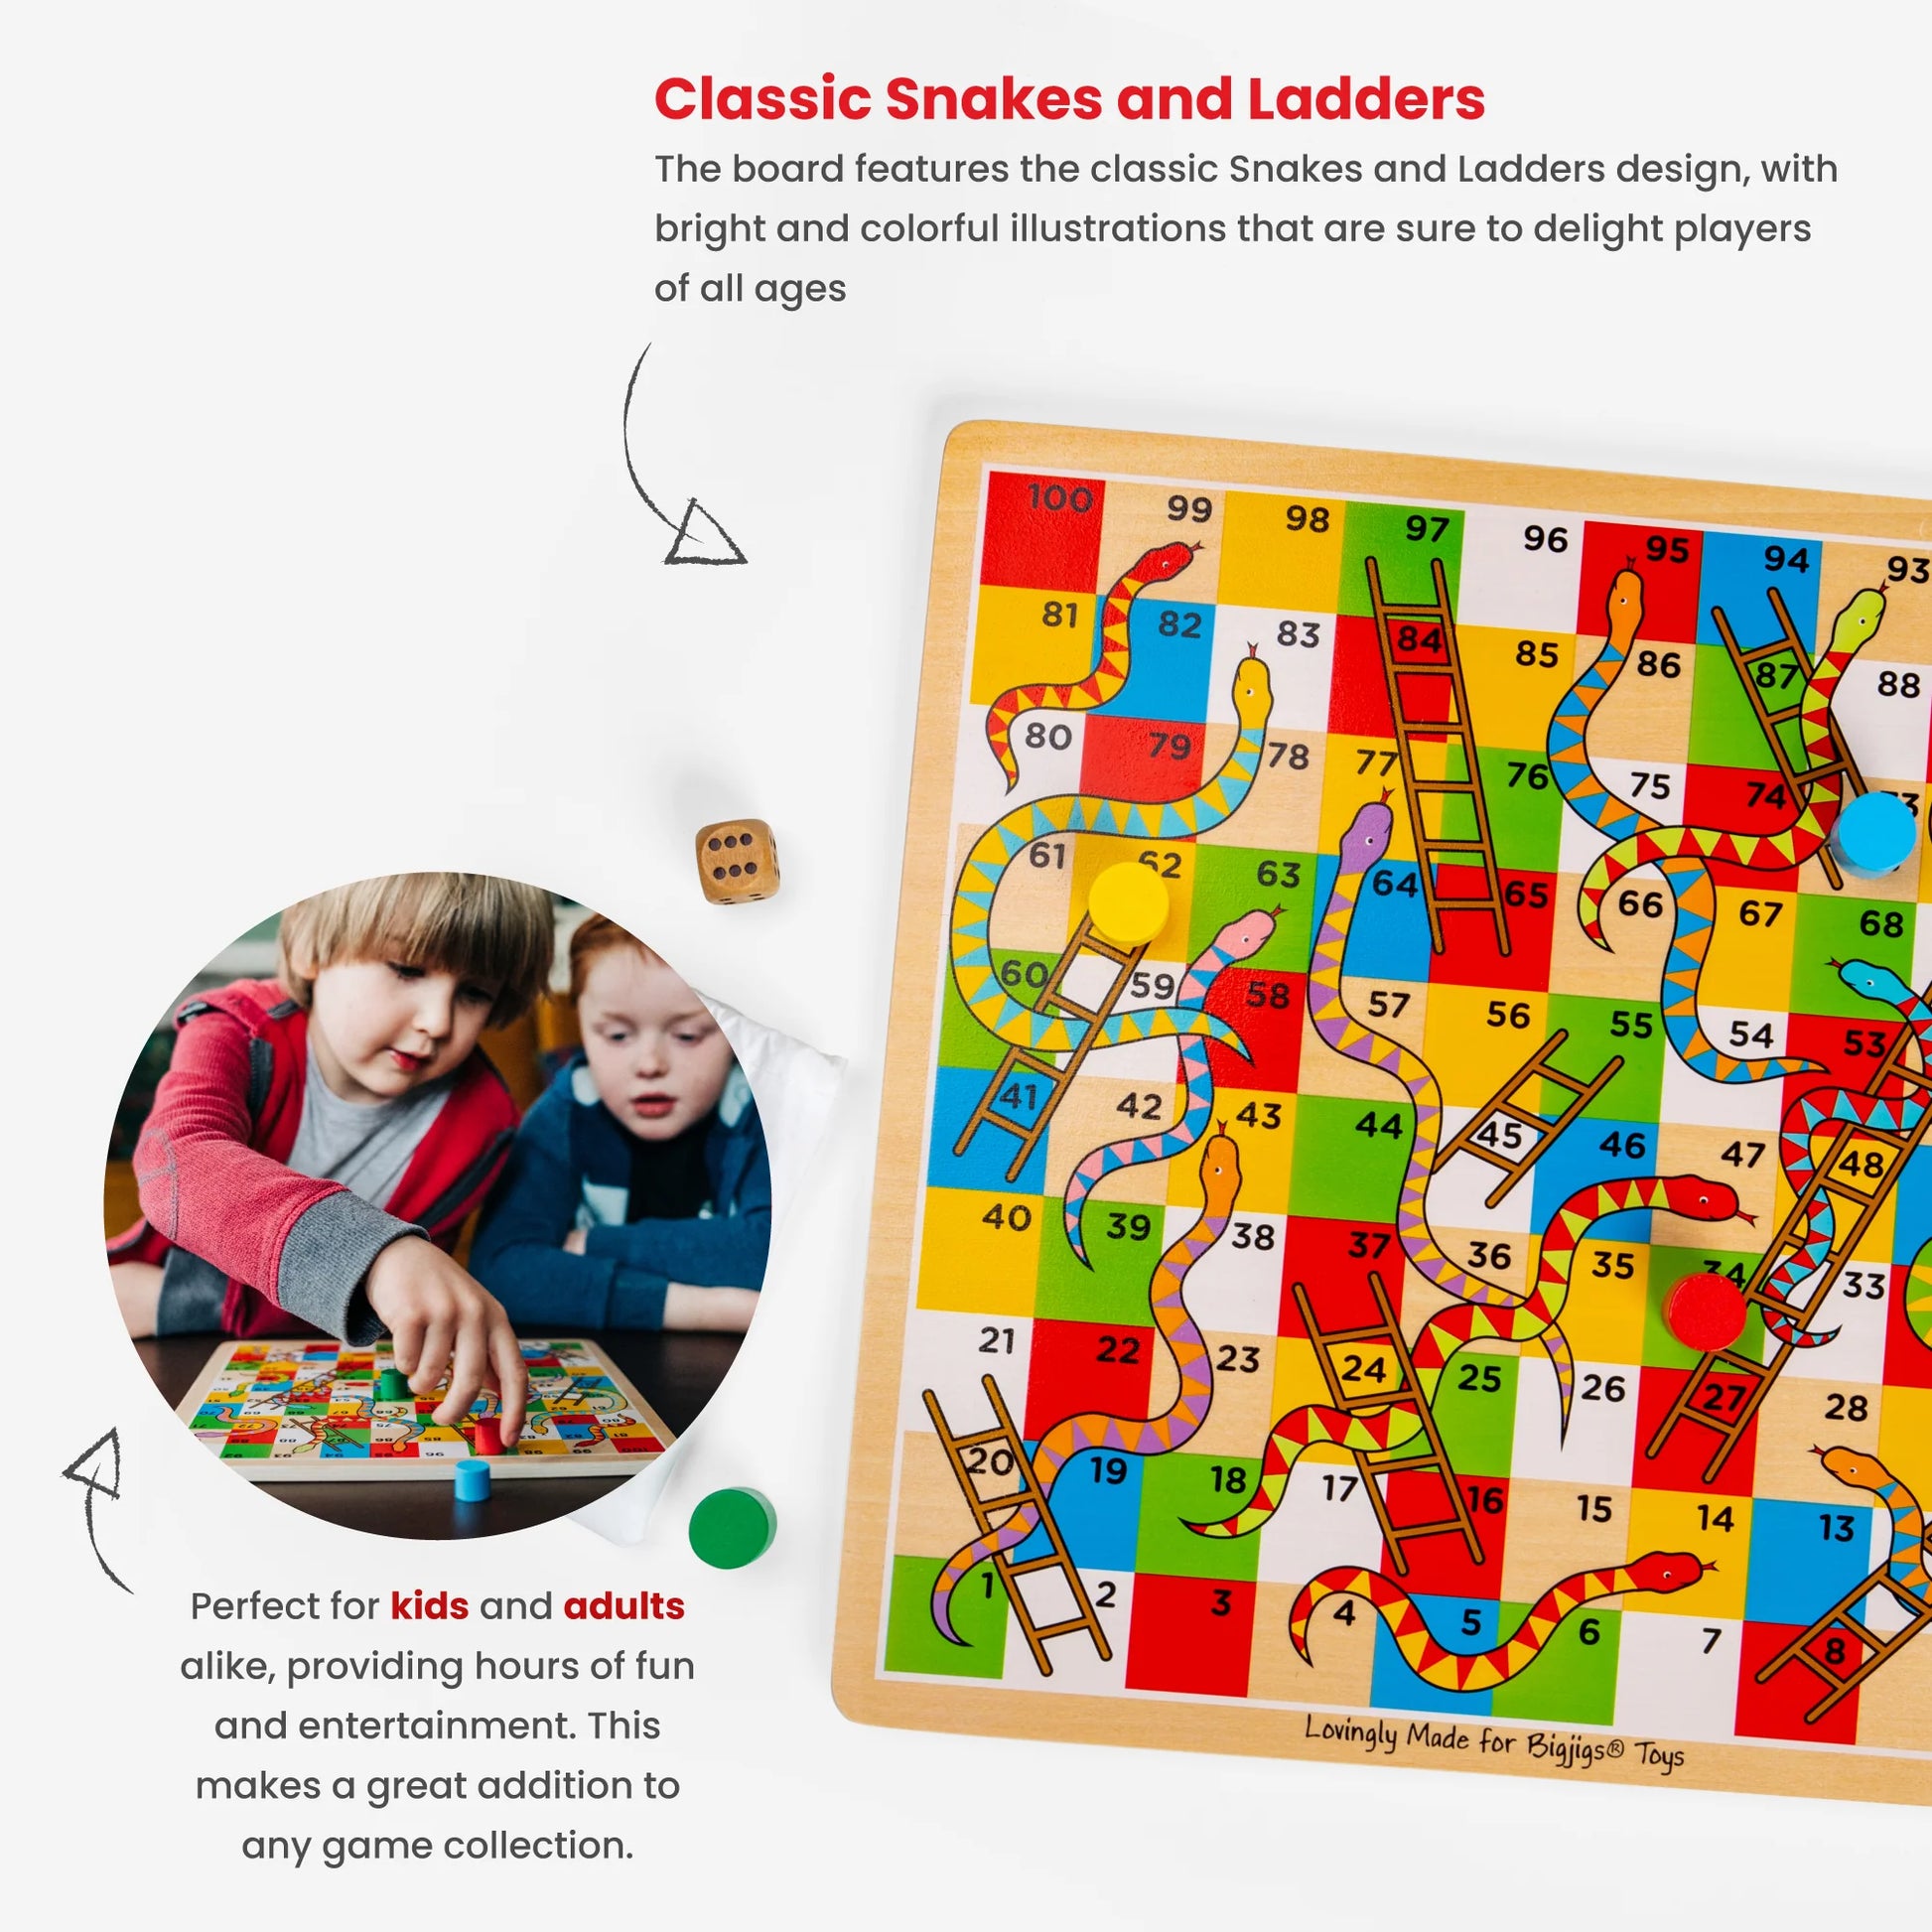 a close up of a child playing a game of snakes and ladders.